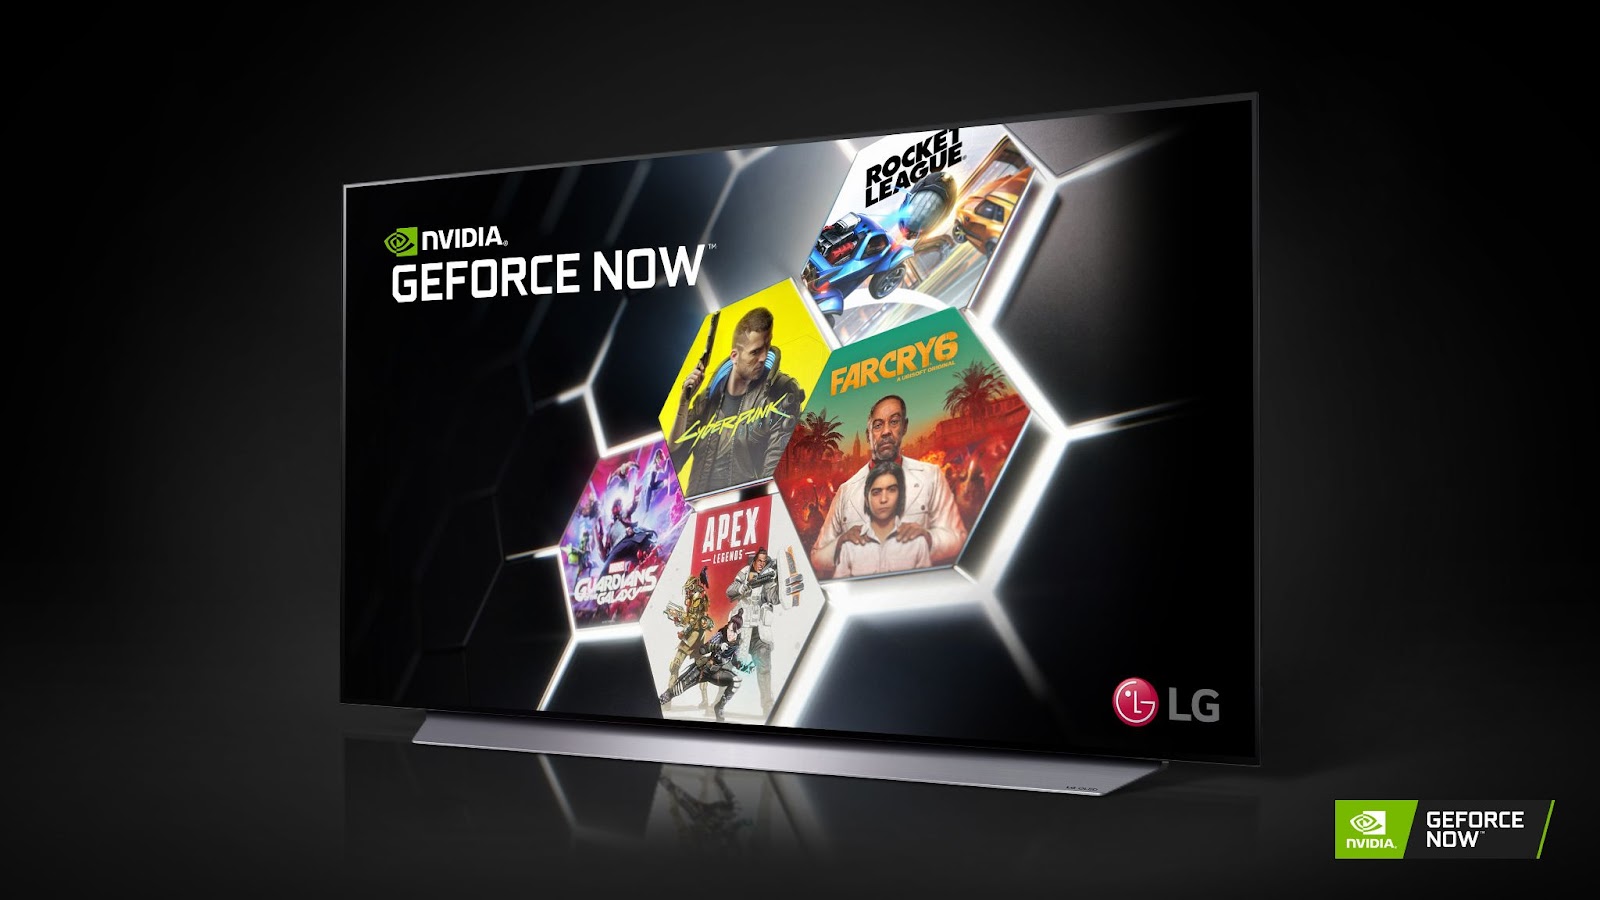  NVIDIA GeForce NOW lowers the barrier to entry for high-quality gaming on any device 